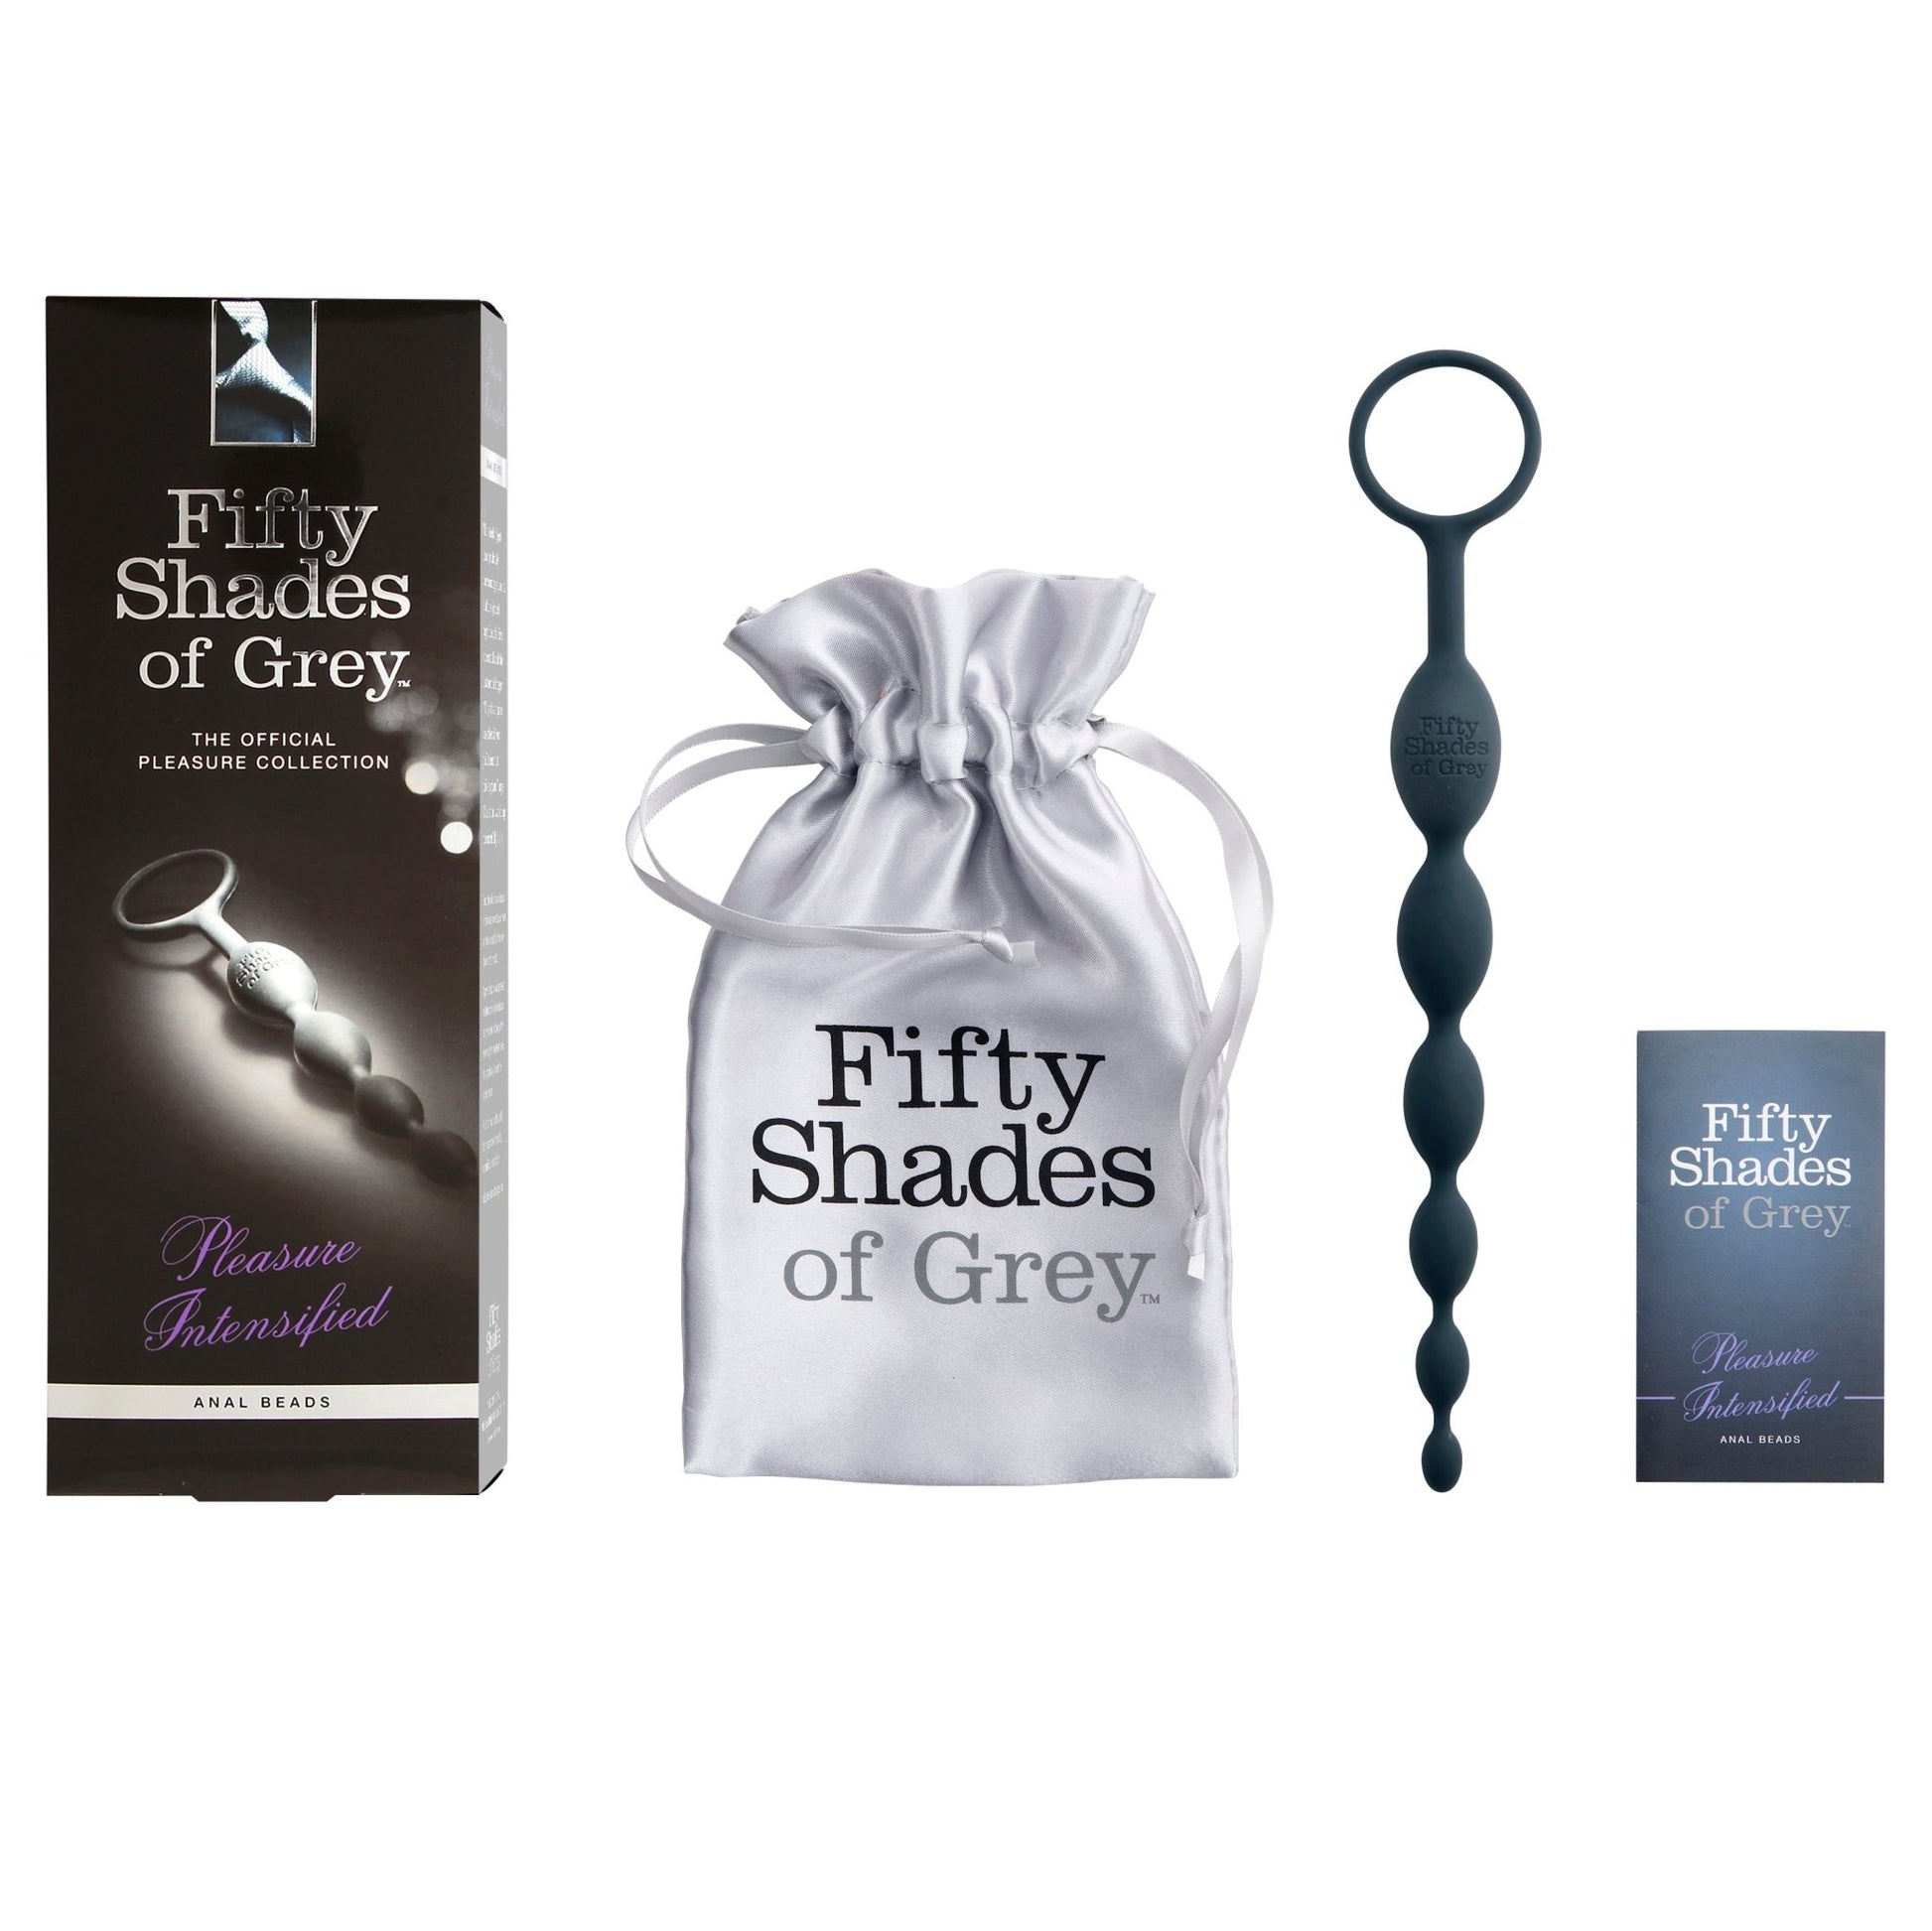 50 Shades Of Grey - Fifty Shades Of Grey - Pleasure Intensified - Yonifyer